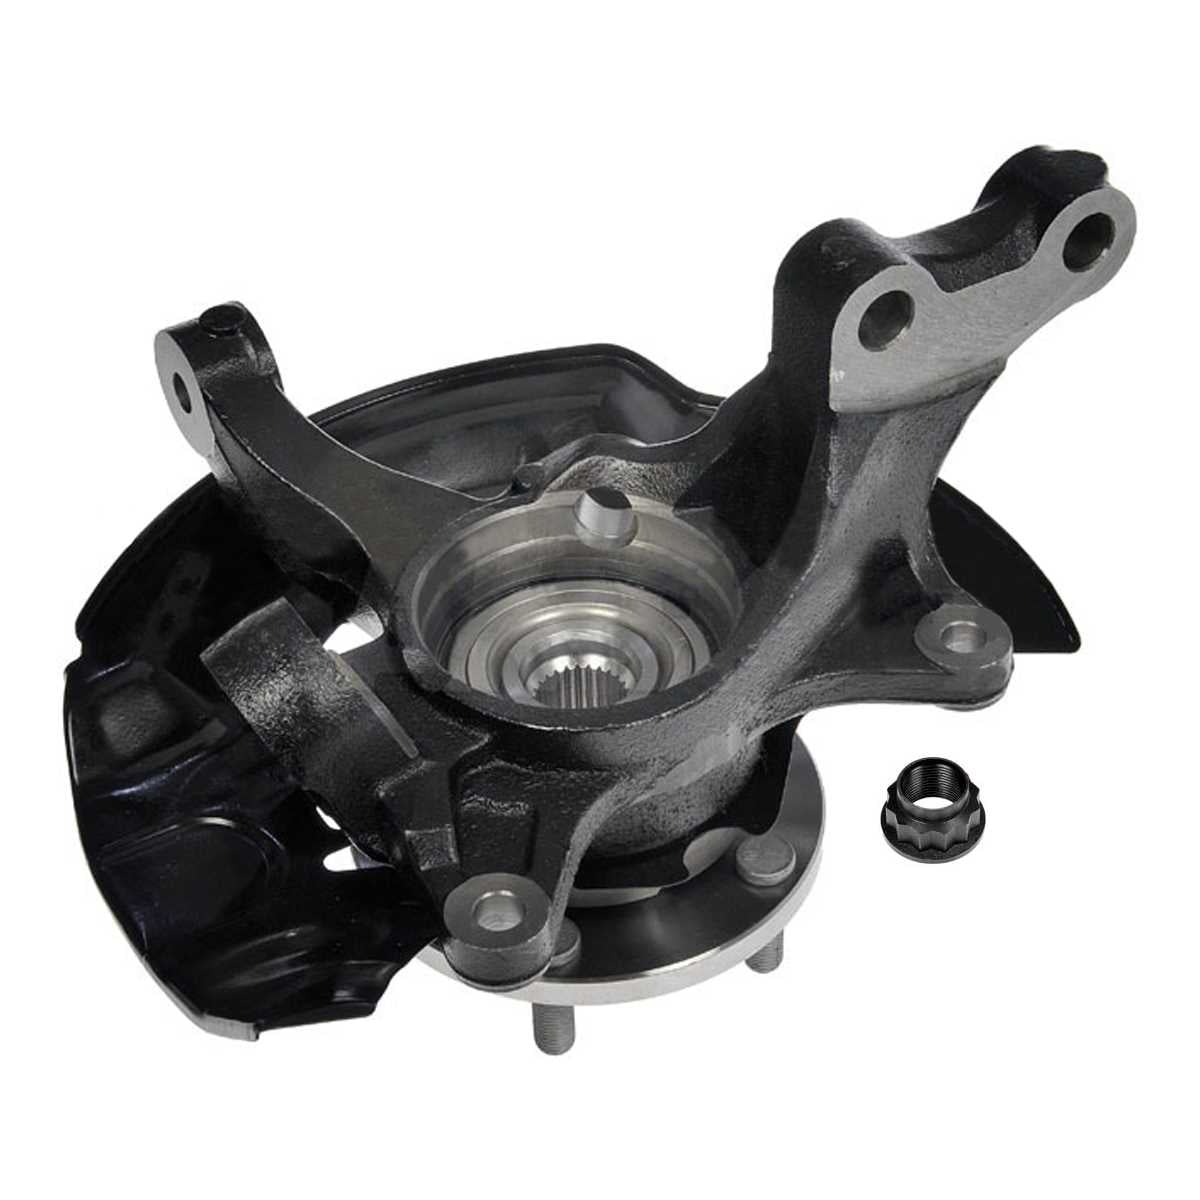 AutoShack KN798401 Front Driver Side Complete Wheel Hub Bearing & Steering Knuckle Assembly 5 Lugs Replacement for 2004 2005 2006 Toyota Camry 2.4L FWD 